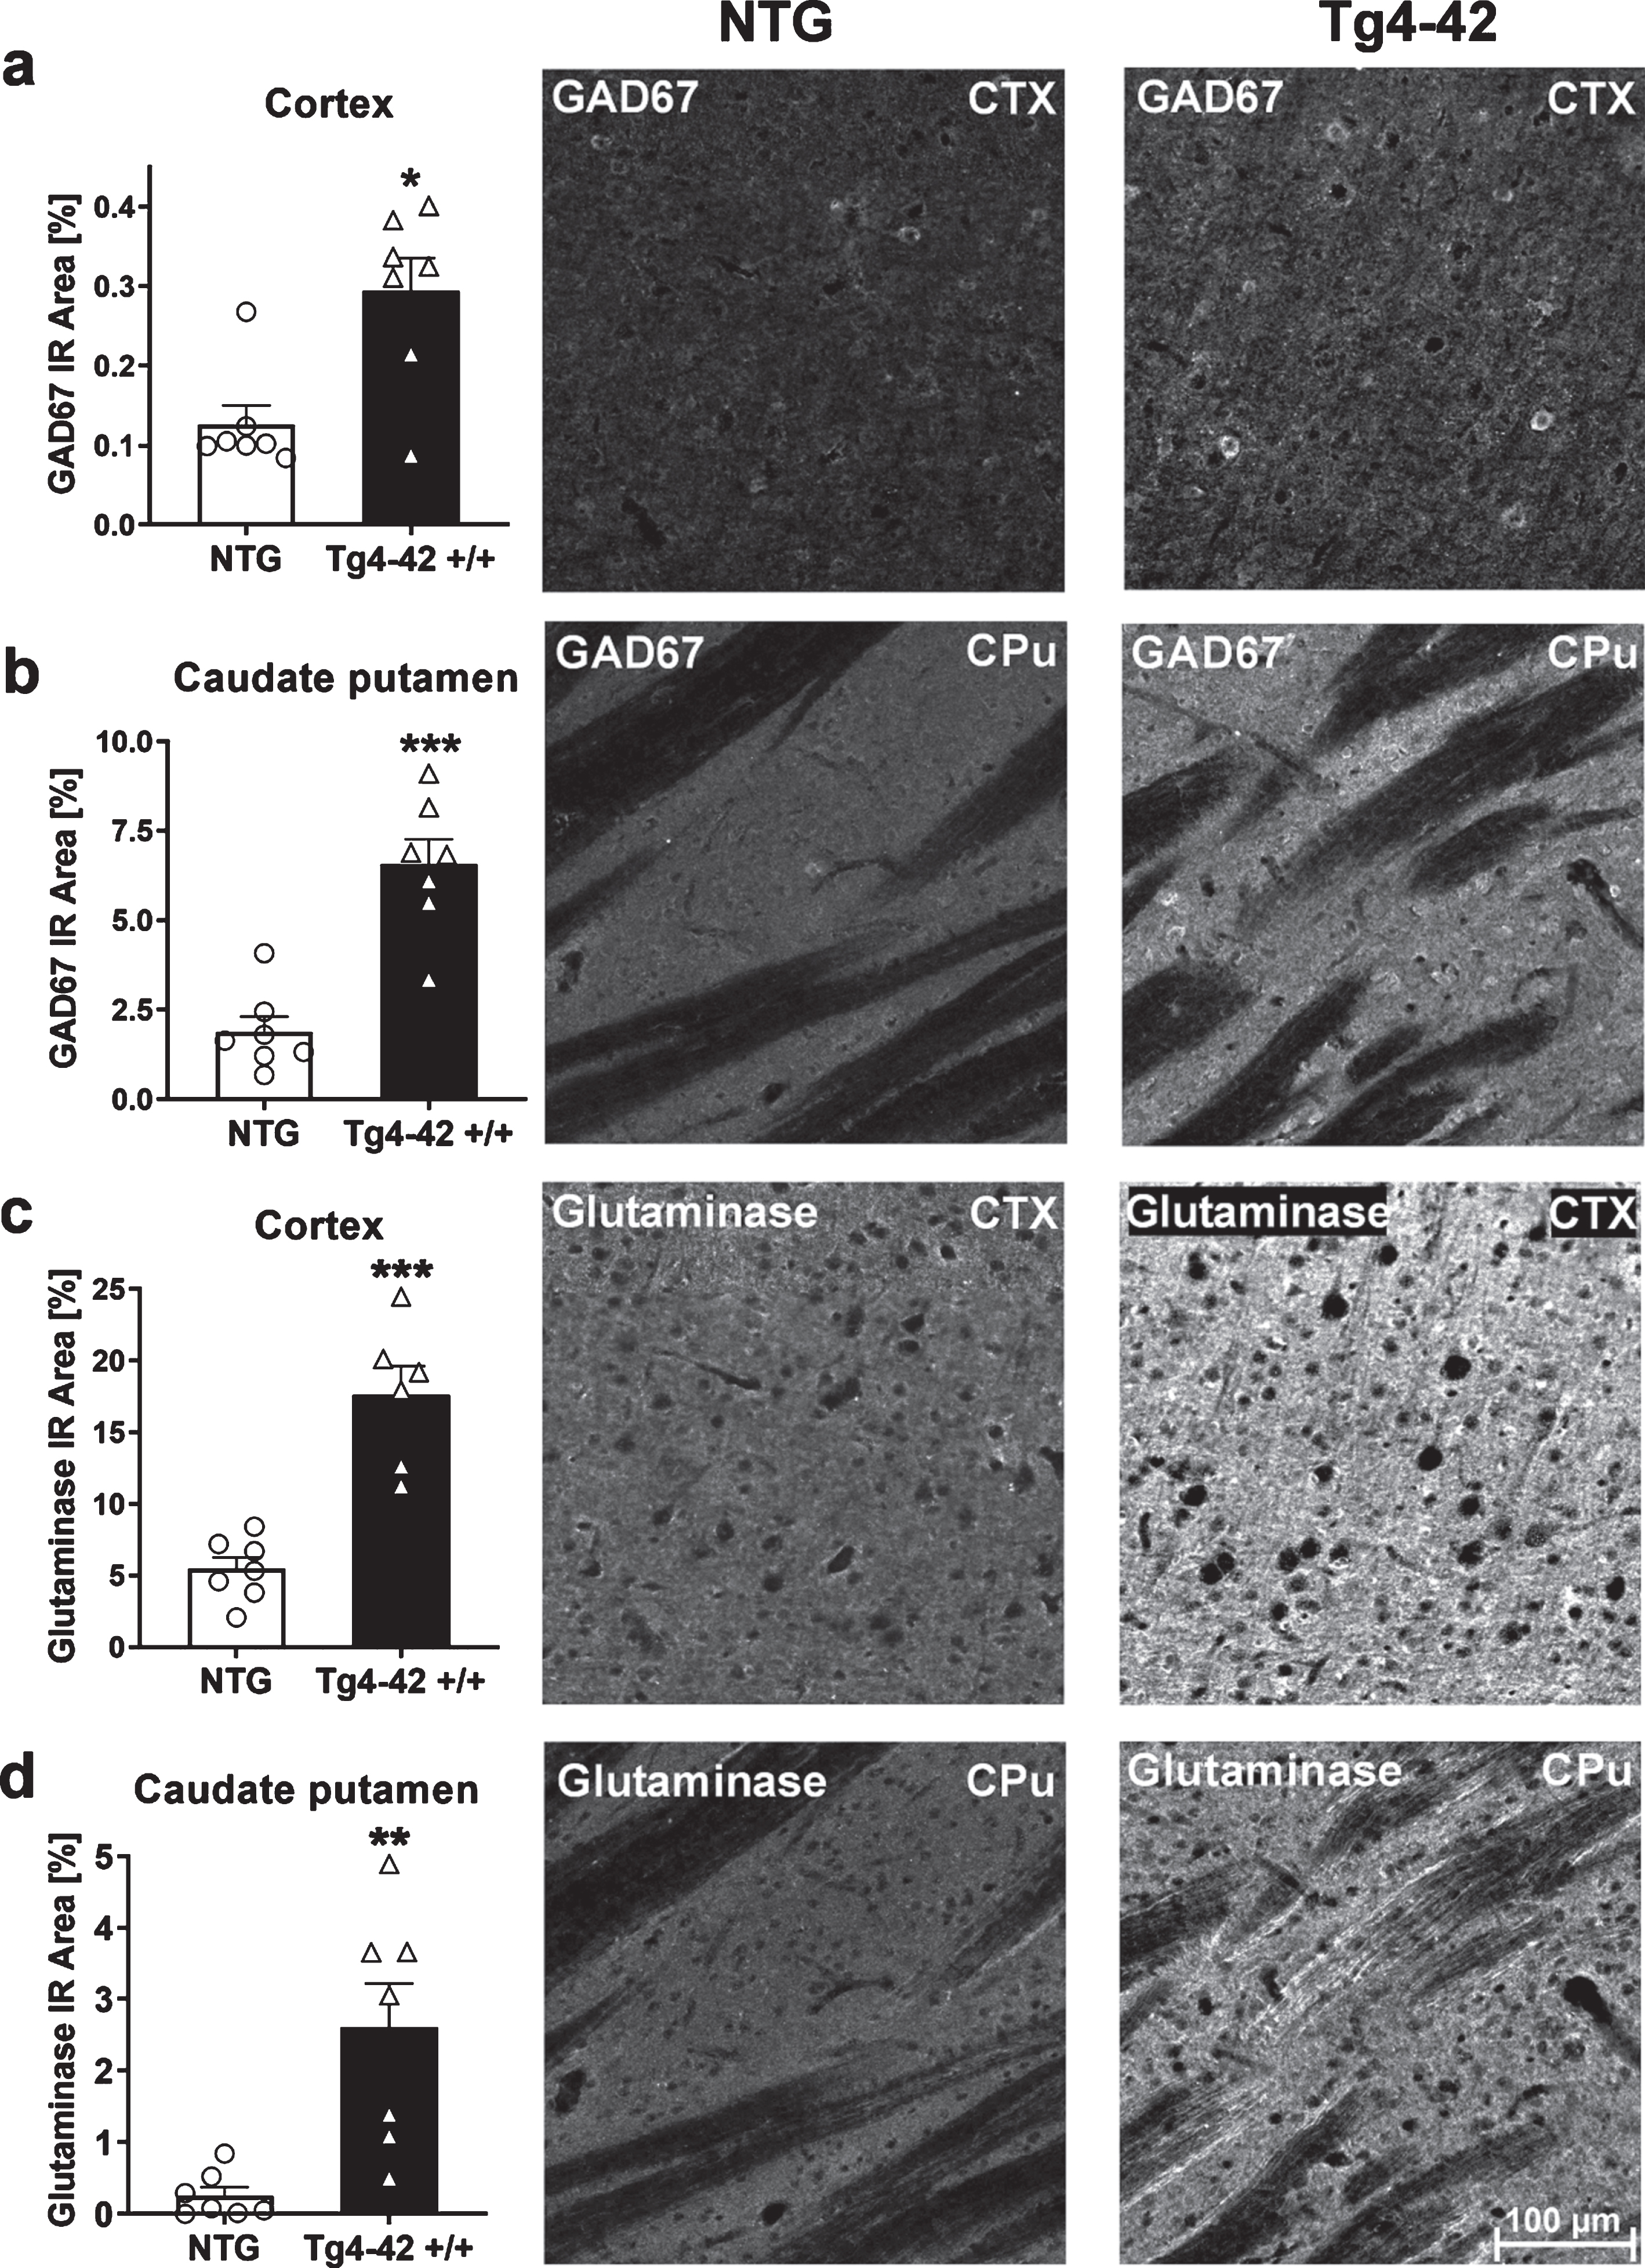 Expression of glutamate-decarboxylase (GAD67) and glutaminase in 9-month-old Tg4-42 +/+ mice. Quantitative GAD67 expression in cortex (CTX) (a) and caudate putamen (CPu) (b) and glutaminase expression in cortex (c) and caudate putamen (d) shown as immunoreactive (IR) area in percent. Representative images of NTG and Tg4-42 +/+ brain sections. Scale bar 100μm for all images. (a-d) n = 7 per group. Mean + SEM. Unpaired t-test. *p < 0.05, **p < 0.01, ***p < 0.001.